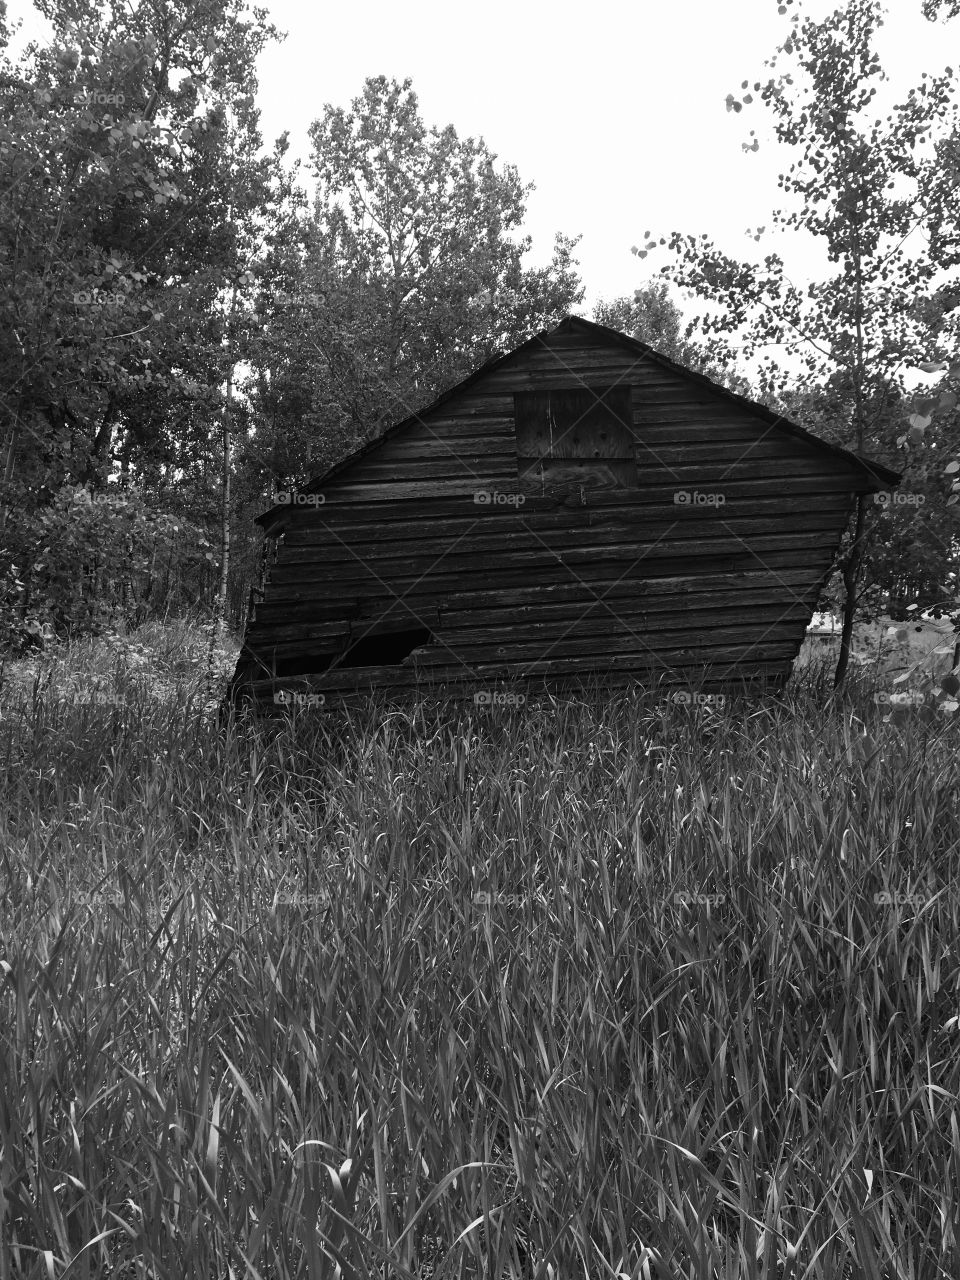 Shed on the farm 